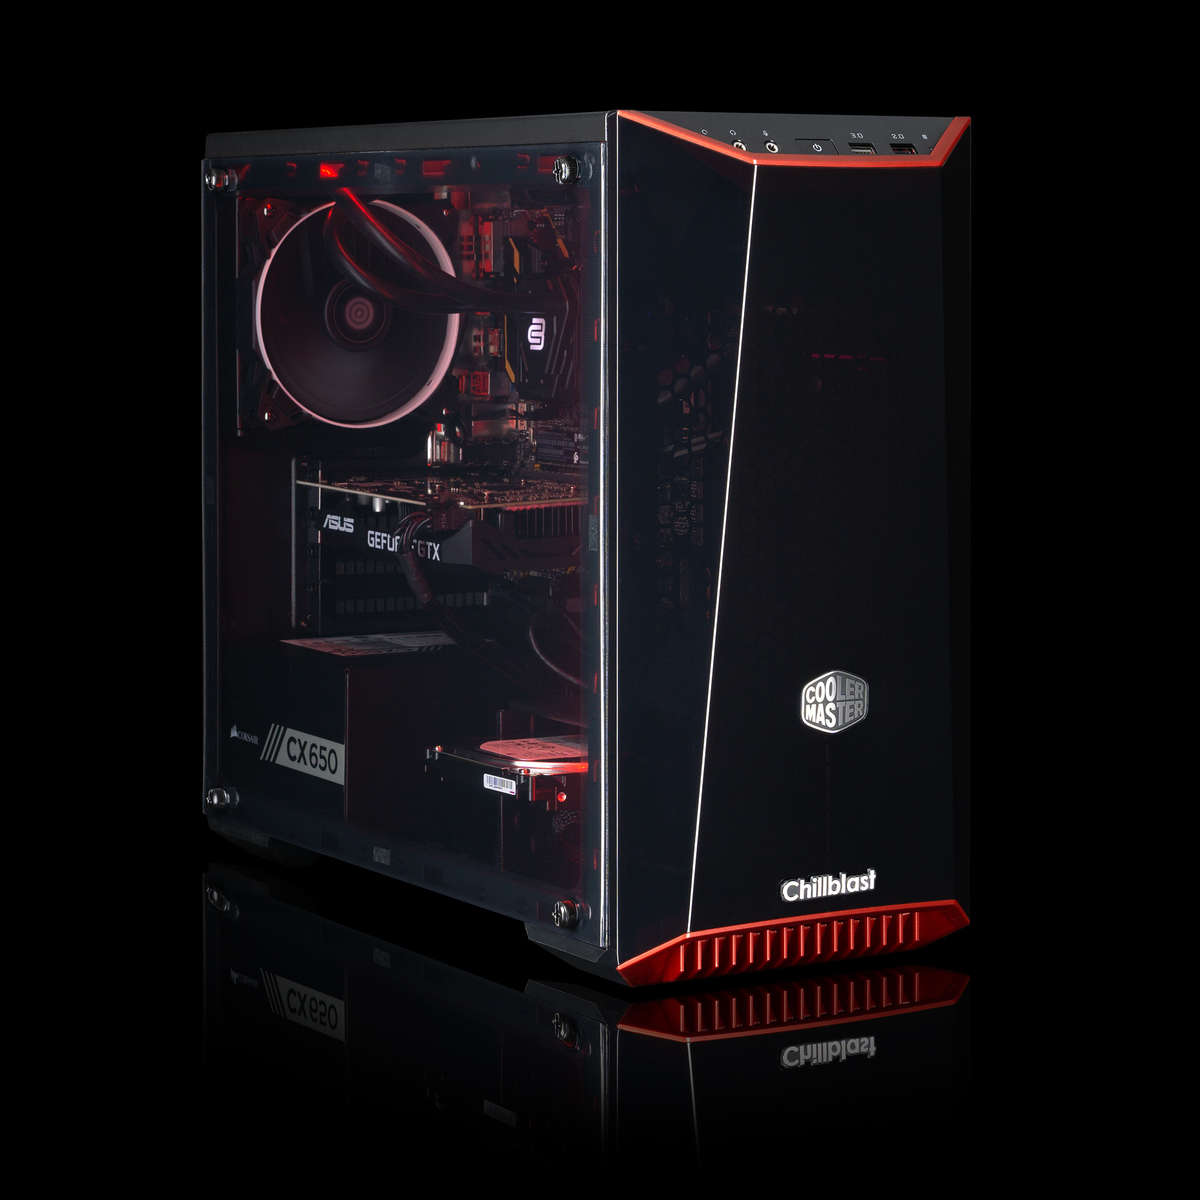 Image of the pre-built Chillblast Neptune Advanced Gaming PC against a dark background.